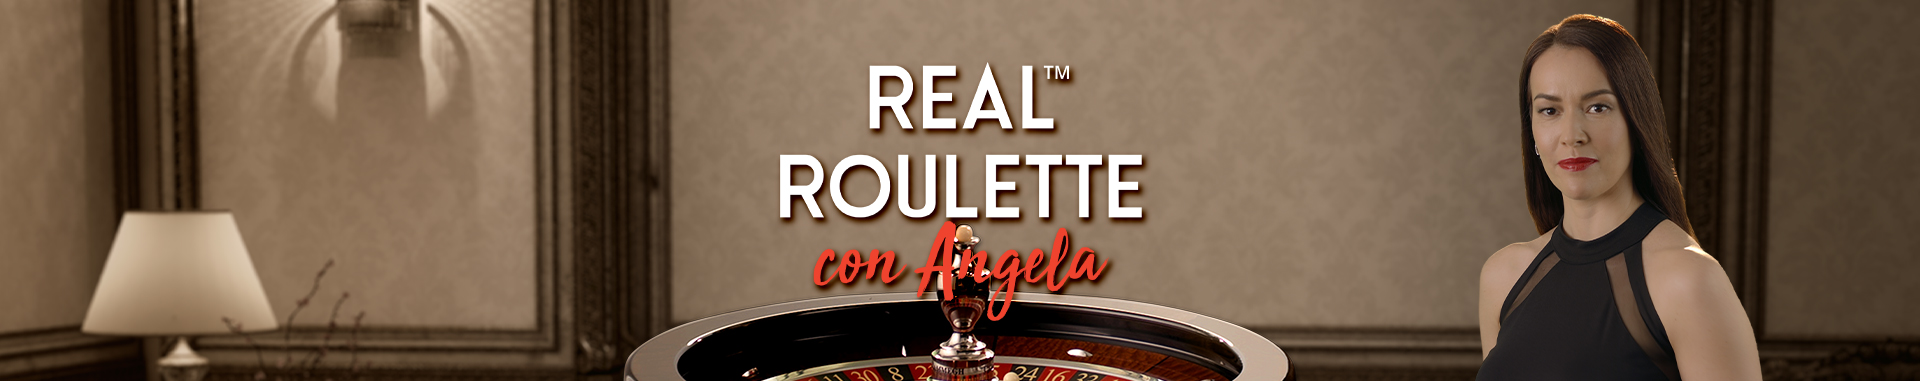 Real Roulette con Angela